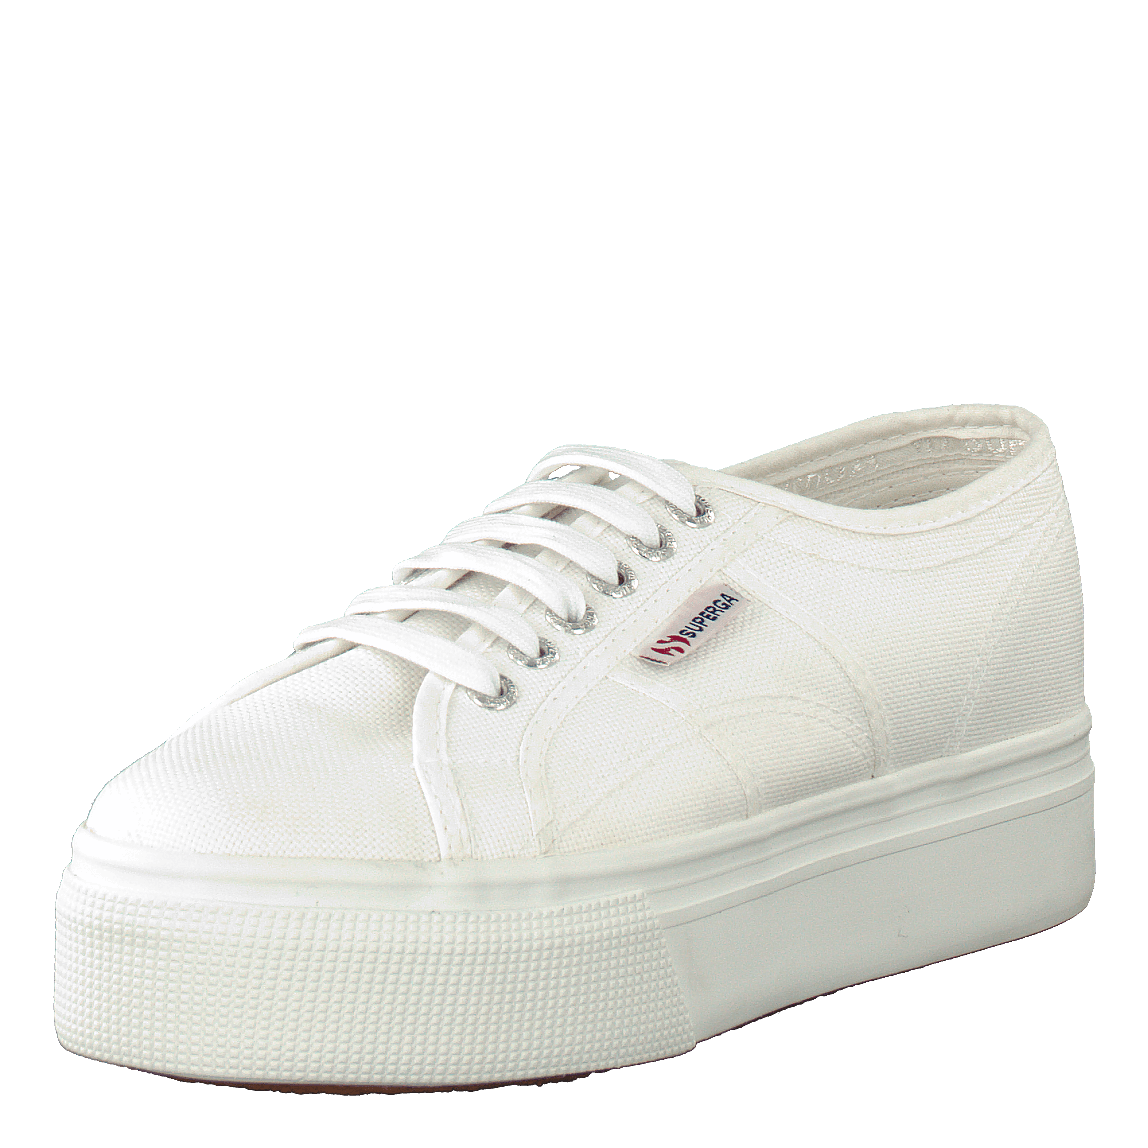 Lady 2790-Cotw Linea and Down 901 white